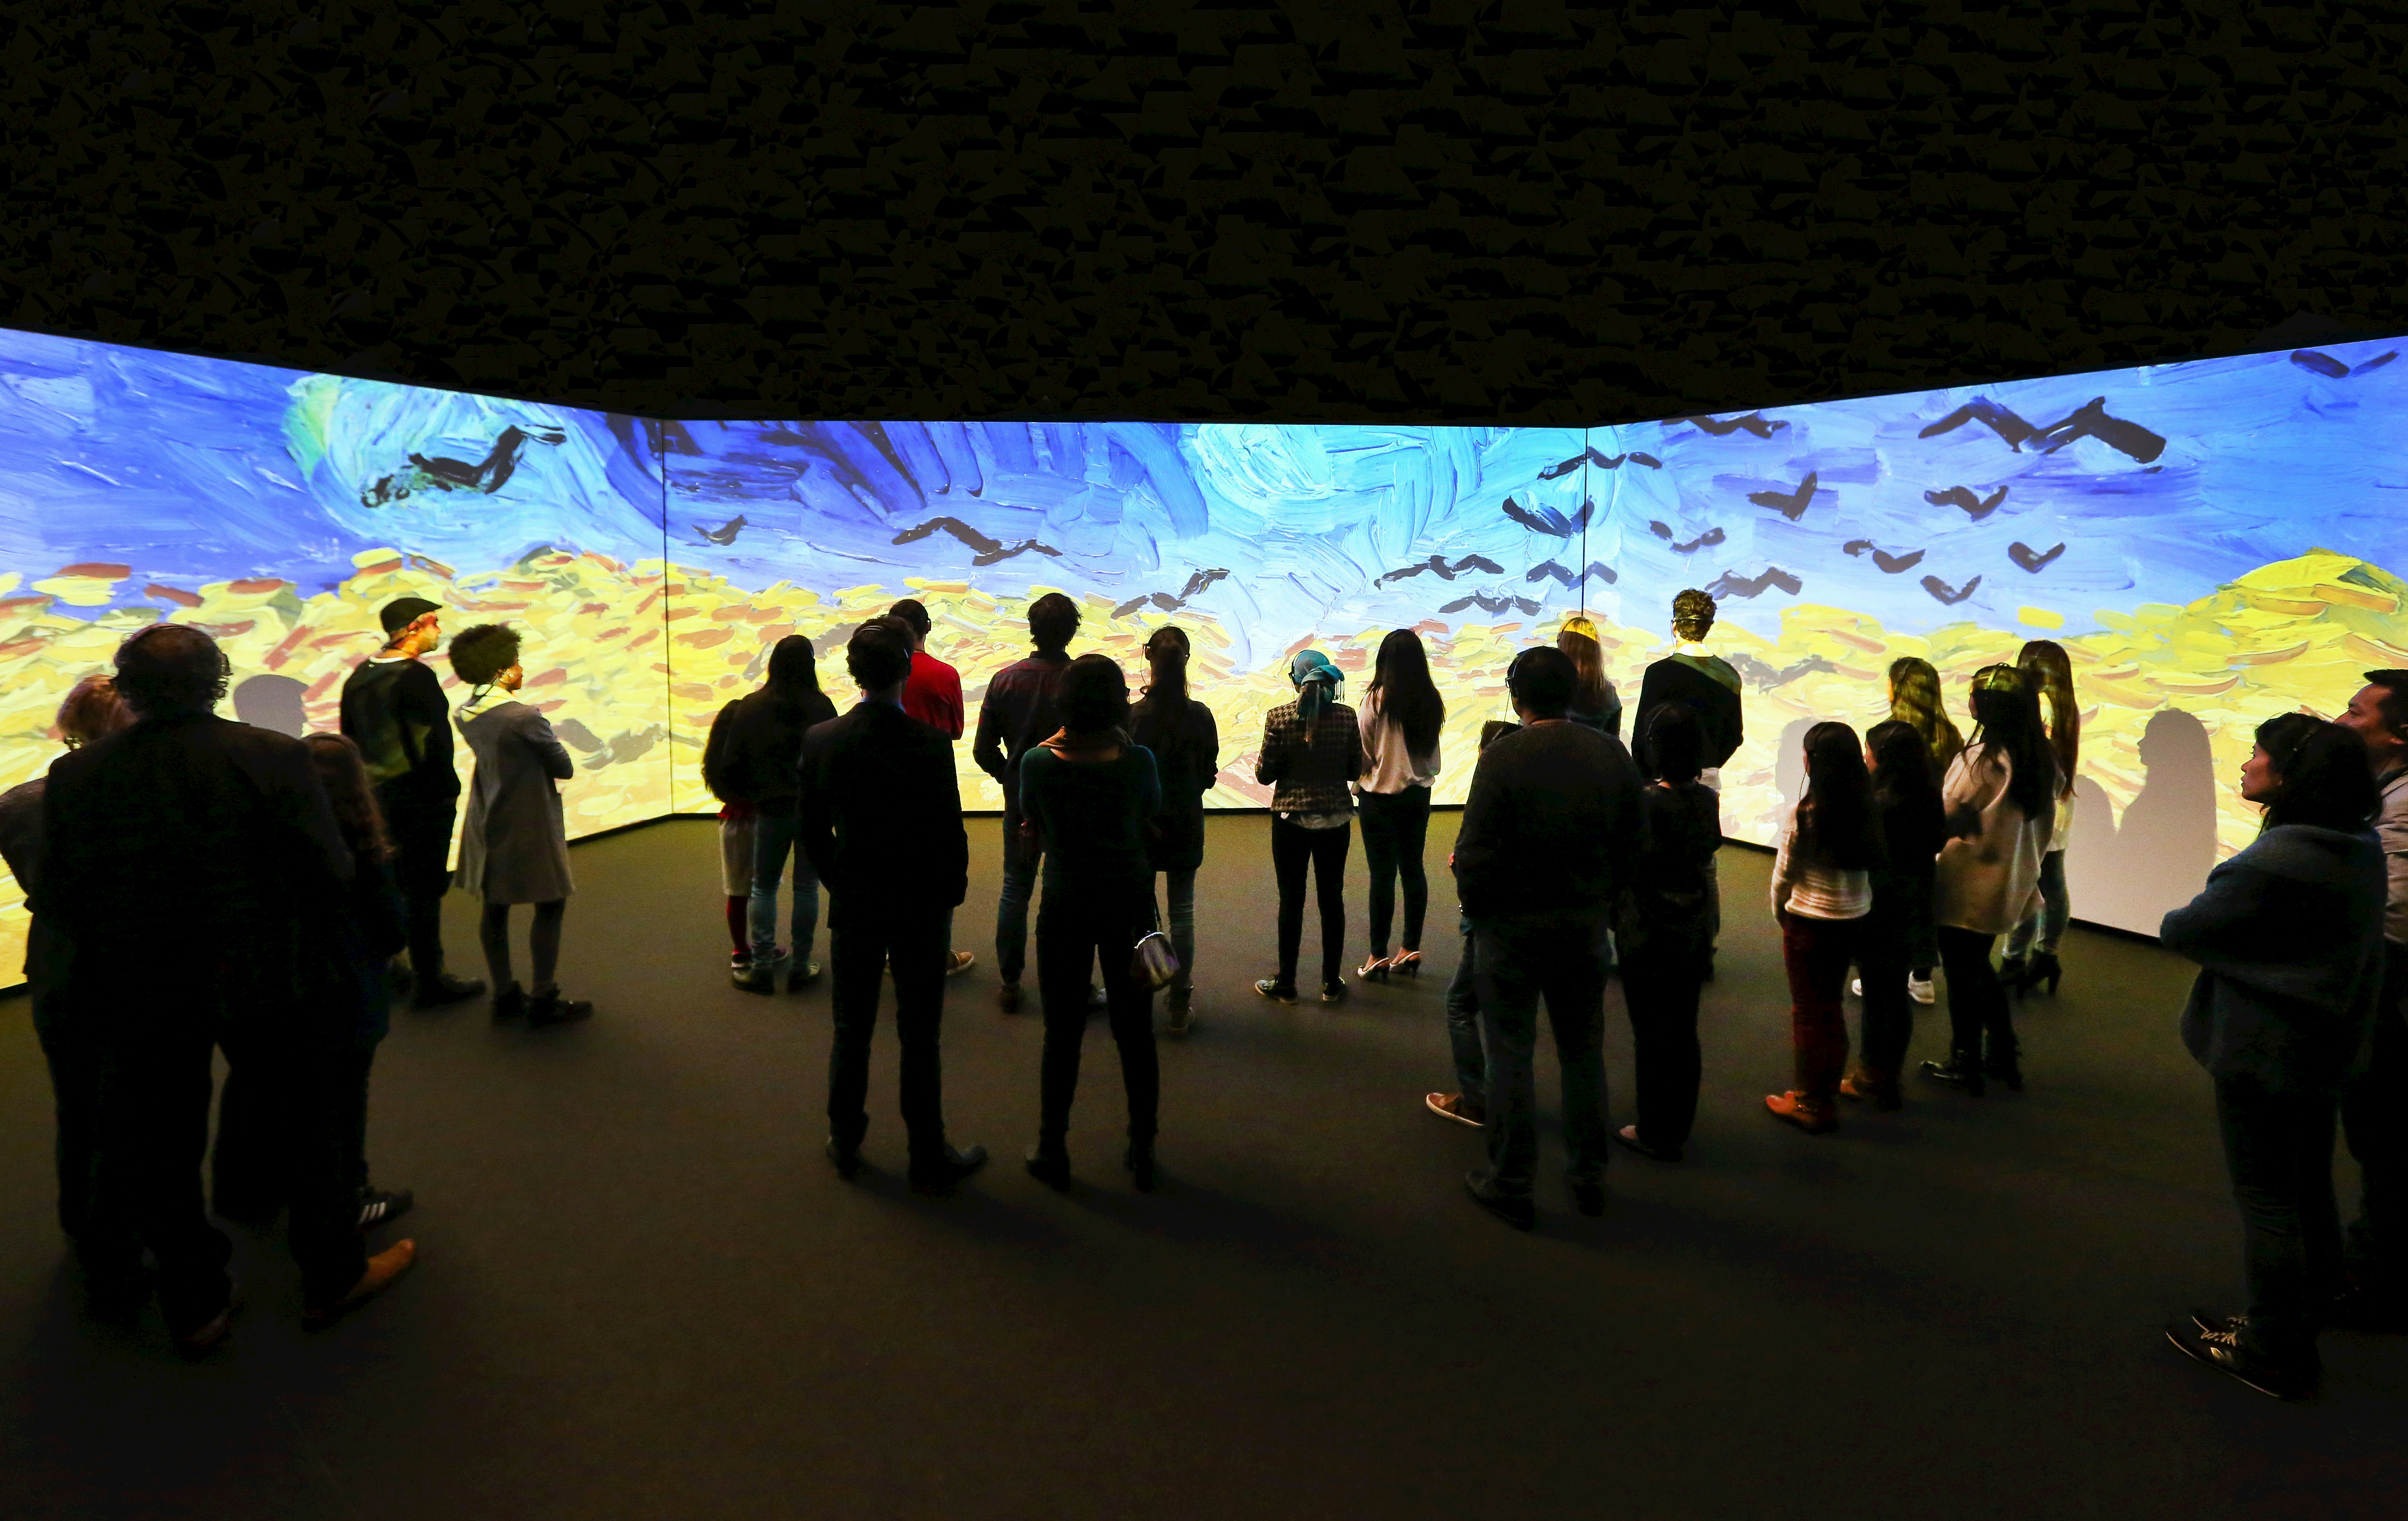 People in front of screens showing a Van Gogh painting